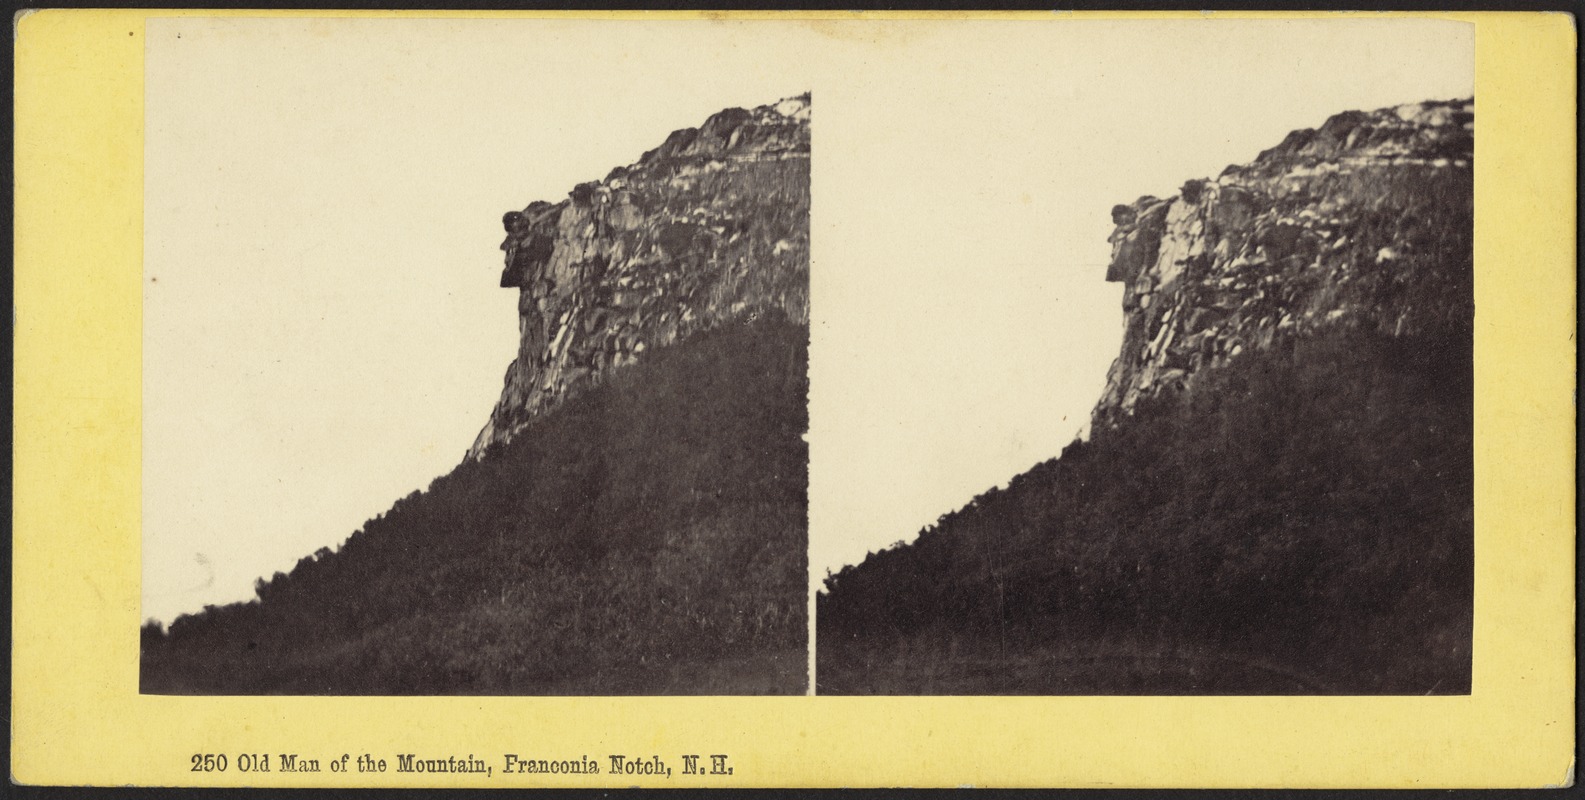 Old Man of the Mountain, Franconia Notch, N. H.